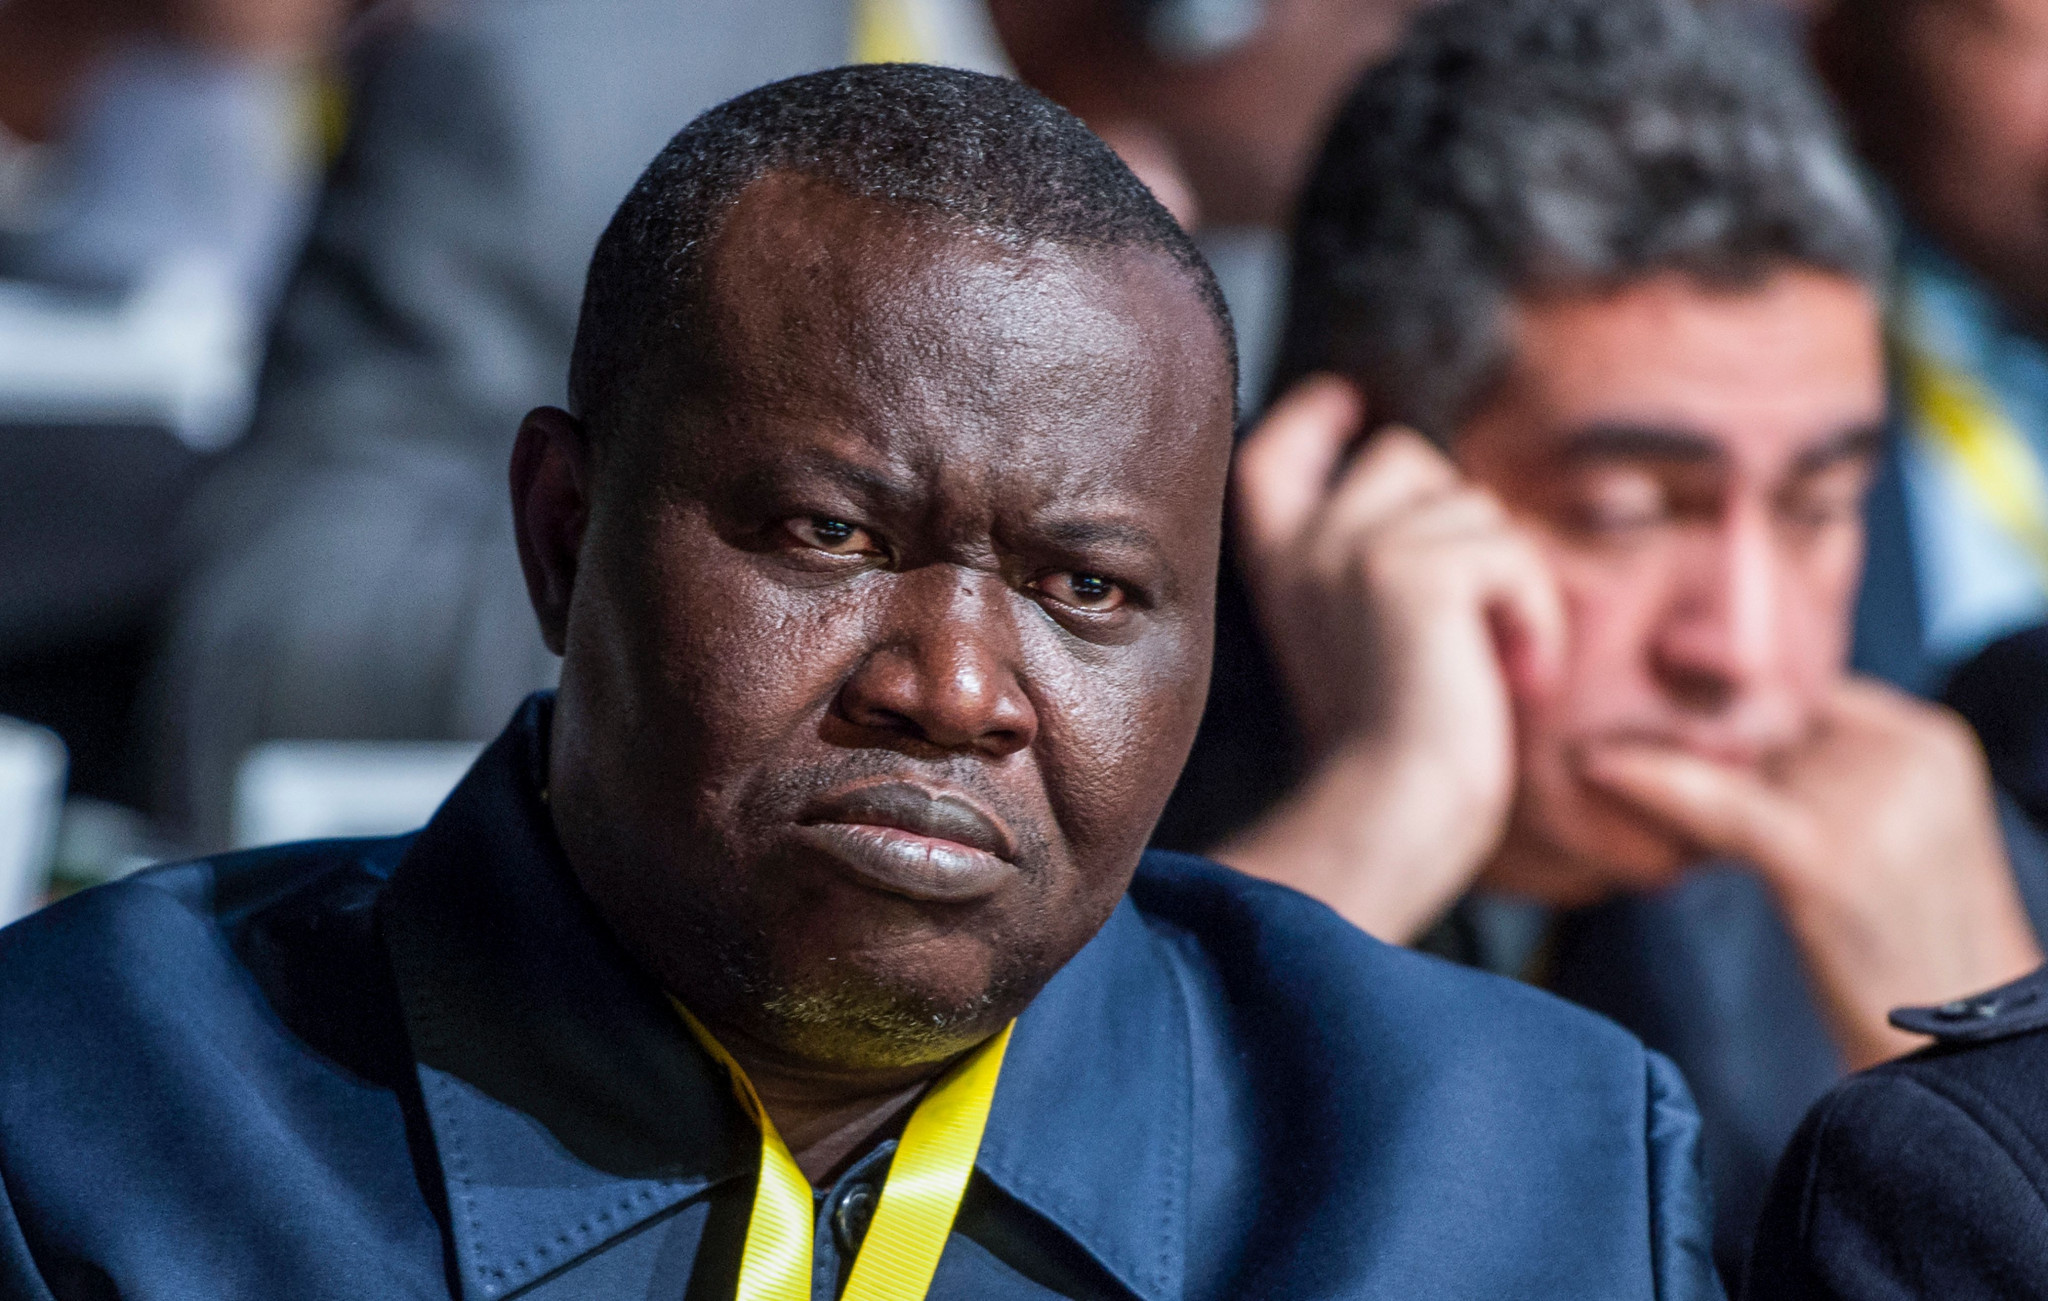 CAF Executive Committee member Patrice-Edouard Ngaissona has been handed over by French authorities to the International Criminal Court in The Hague, where he faces trial for war crimes ©Getty Images